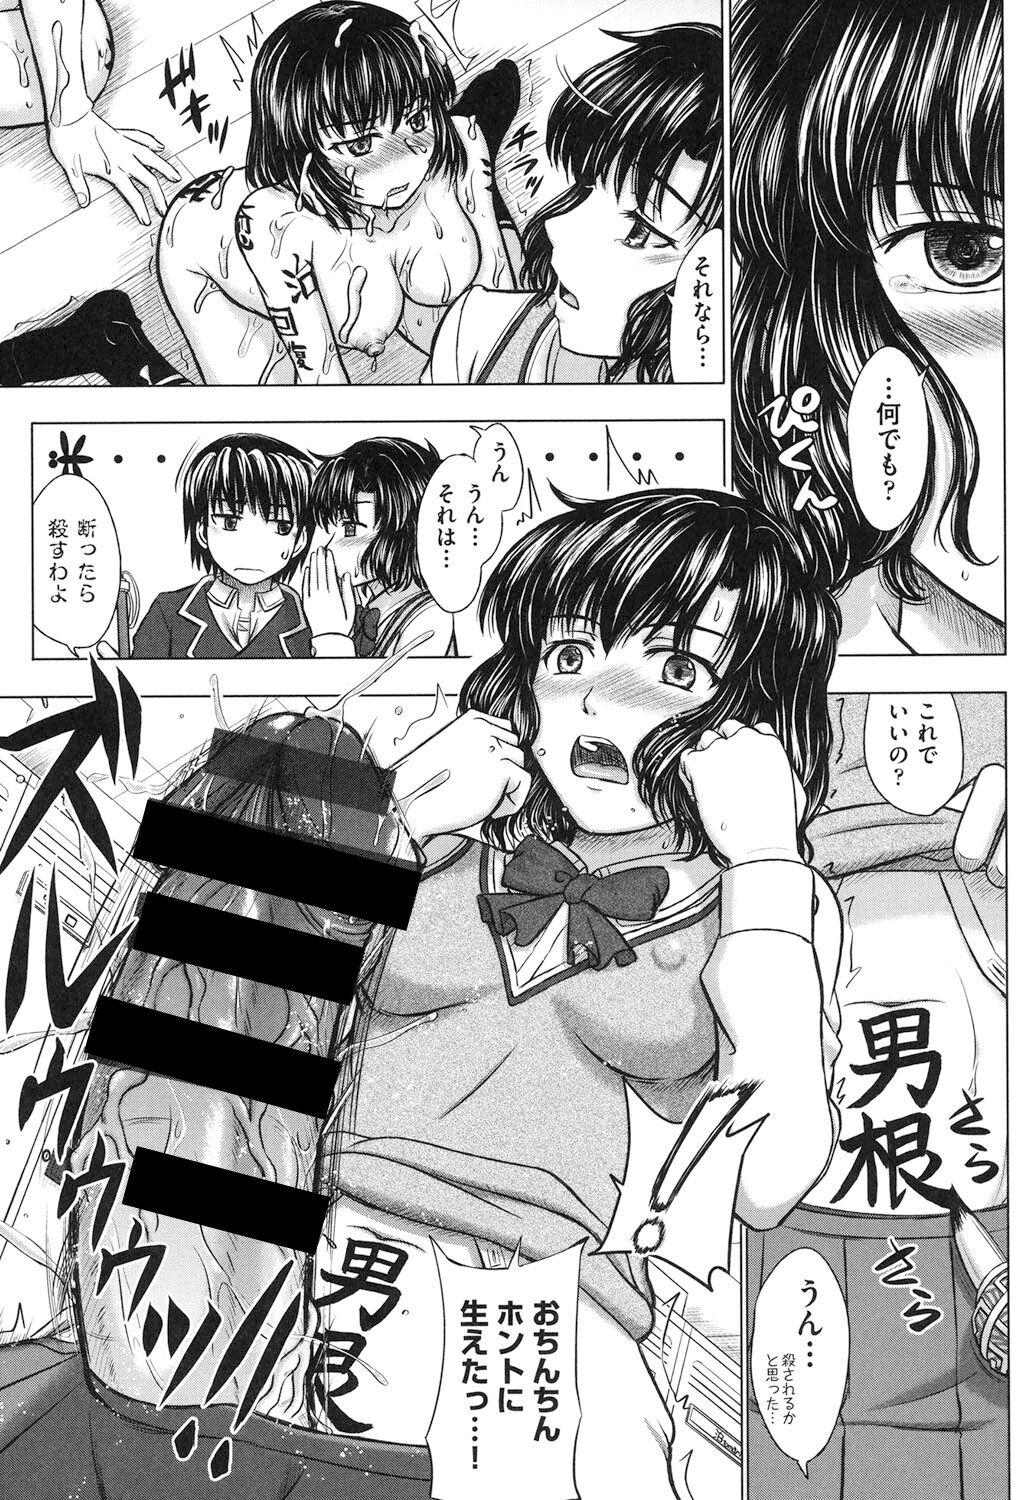 Houkago Kouhai Note - After School Mating Notes 191